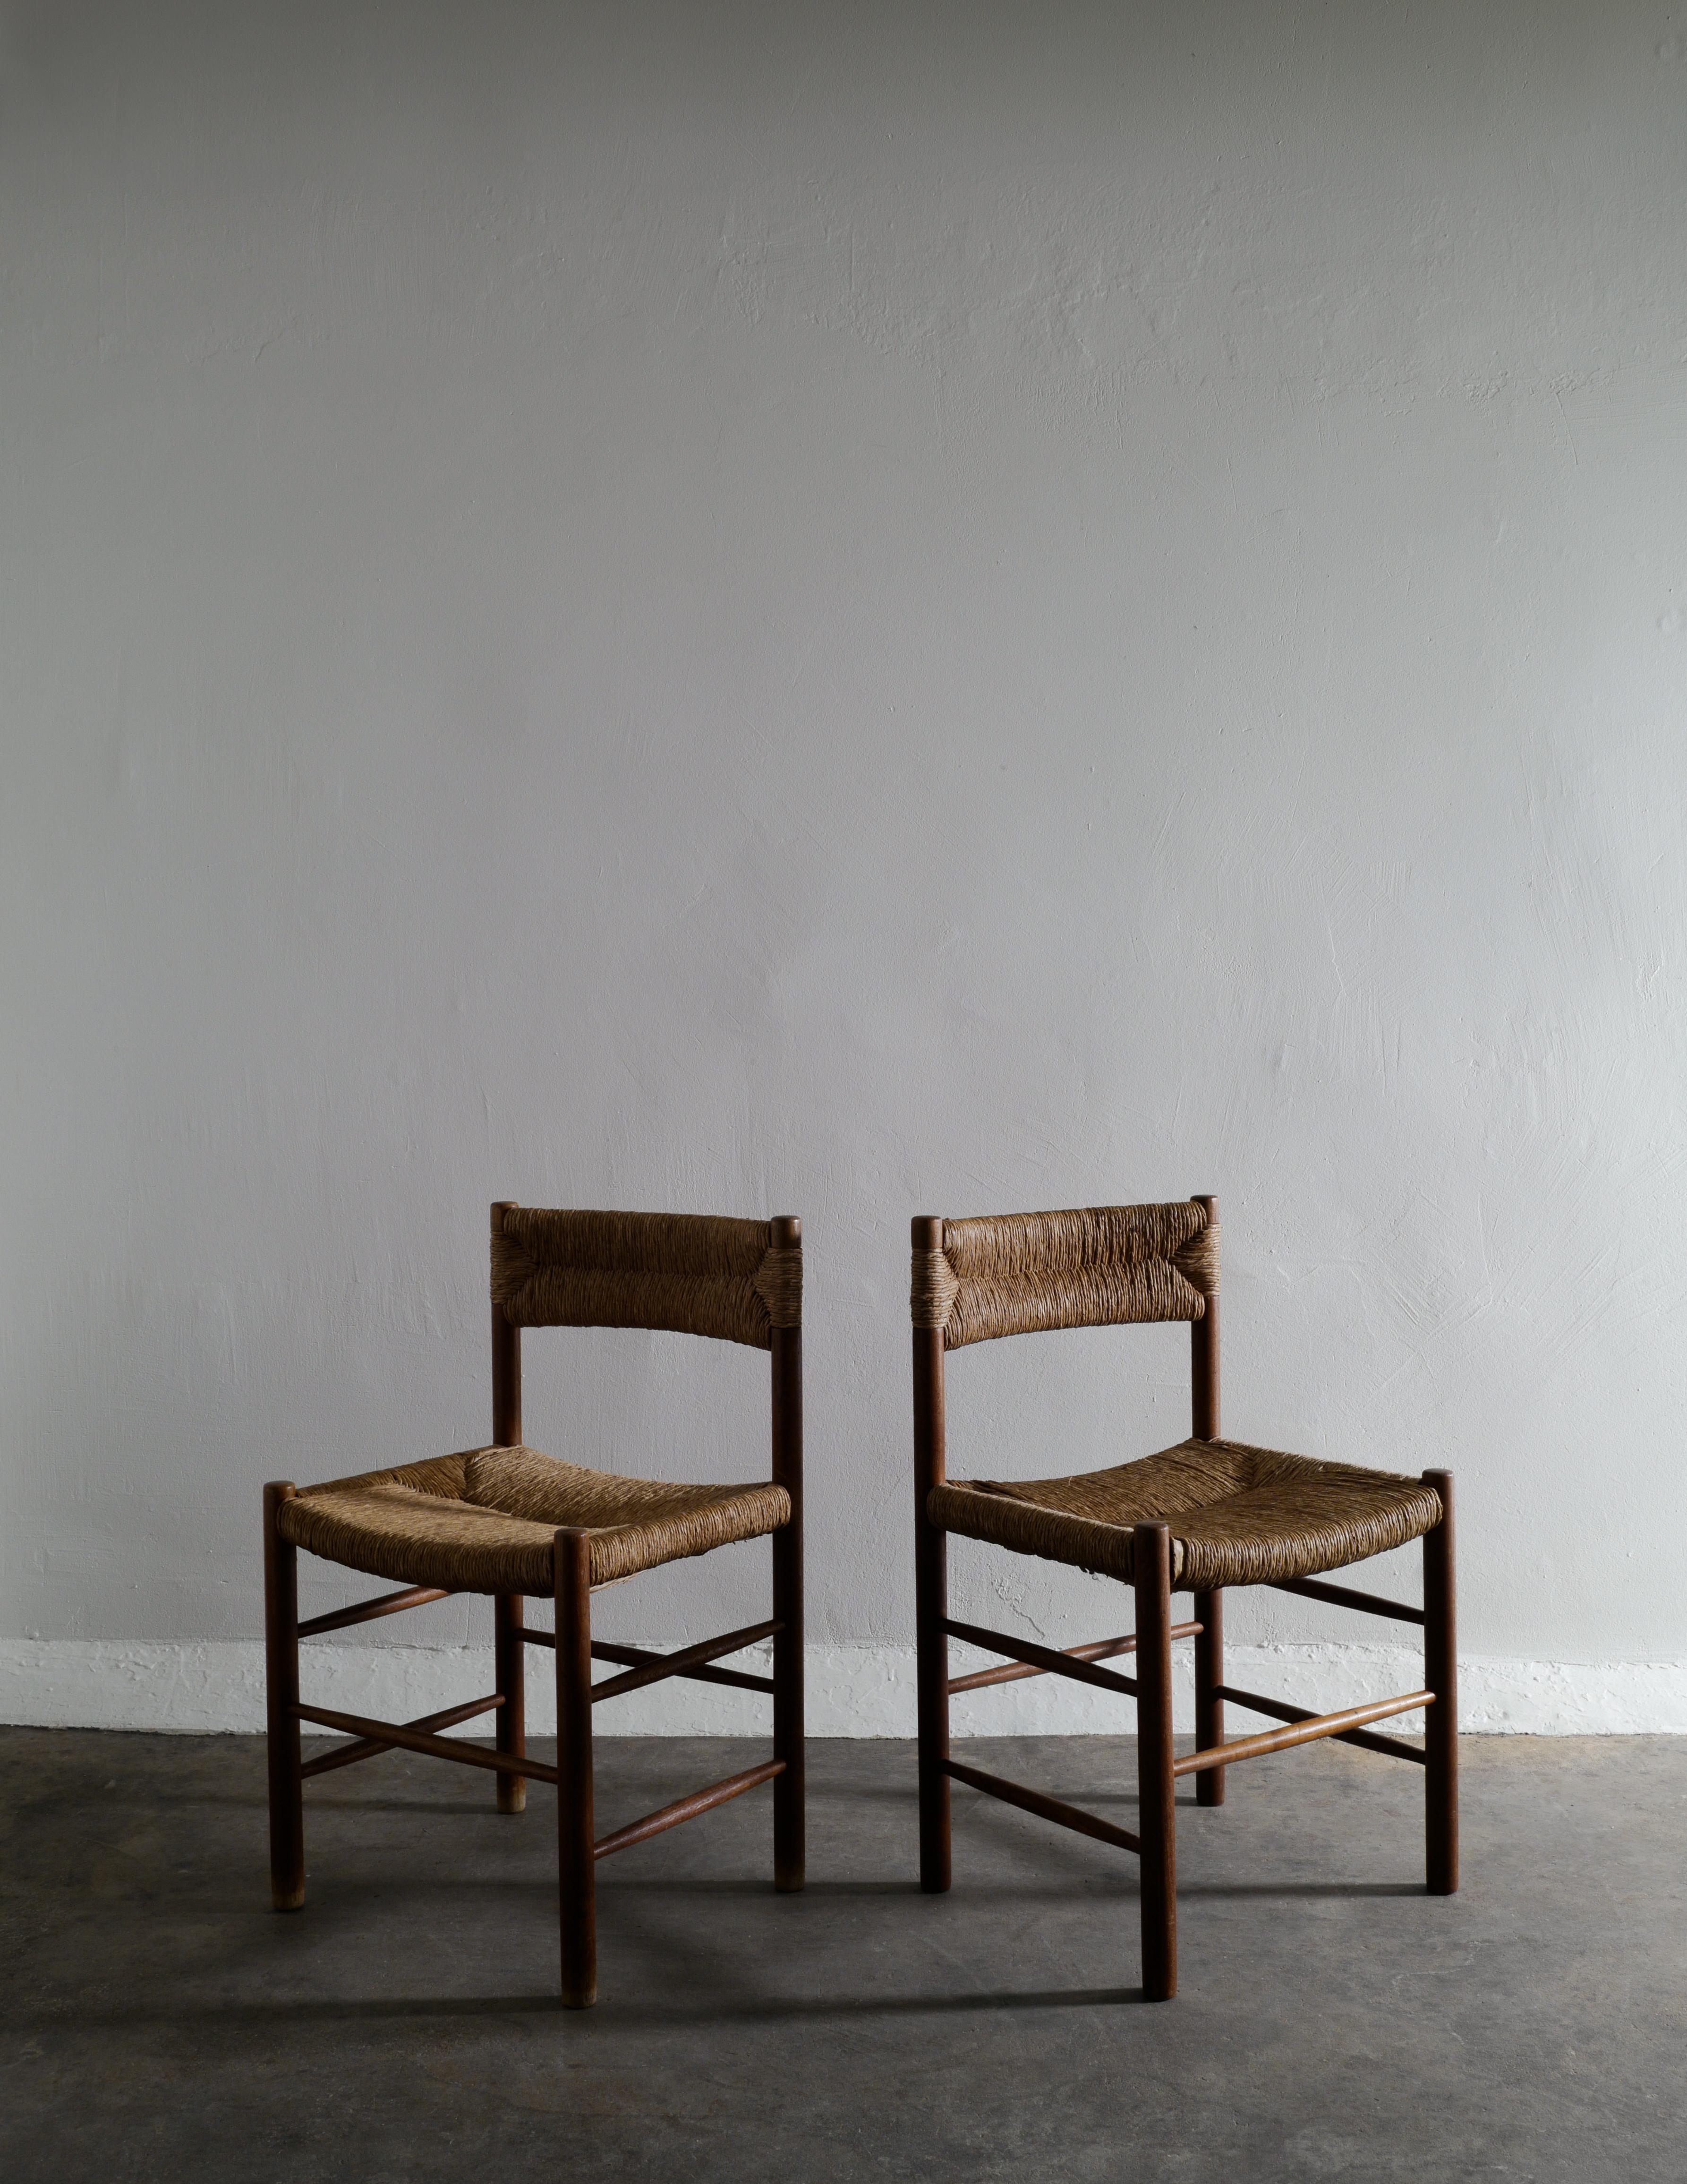 Rare set of four dining chairs designed by Charlotte Perriand produced for Robert Sentou in France in the 1960s. In good vintage and original condition with signs from age and use. Aquired from a private collection. 

Dimensions: H: 76 cm W: 47 cm